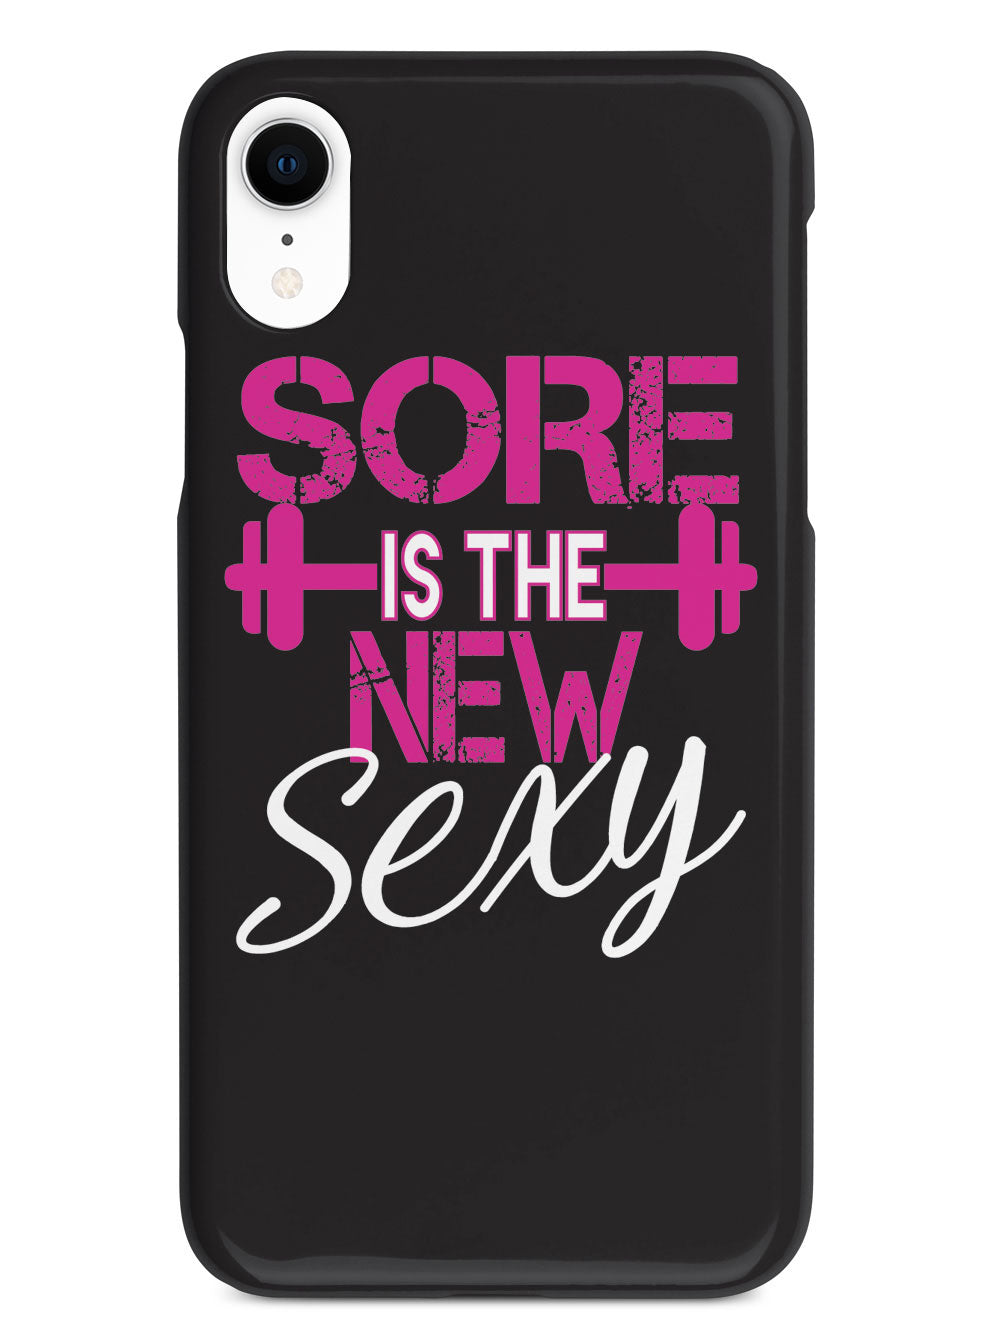 Sore is the New Sexy - Work Out Case